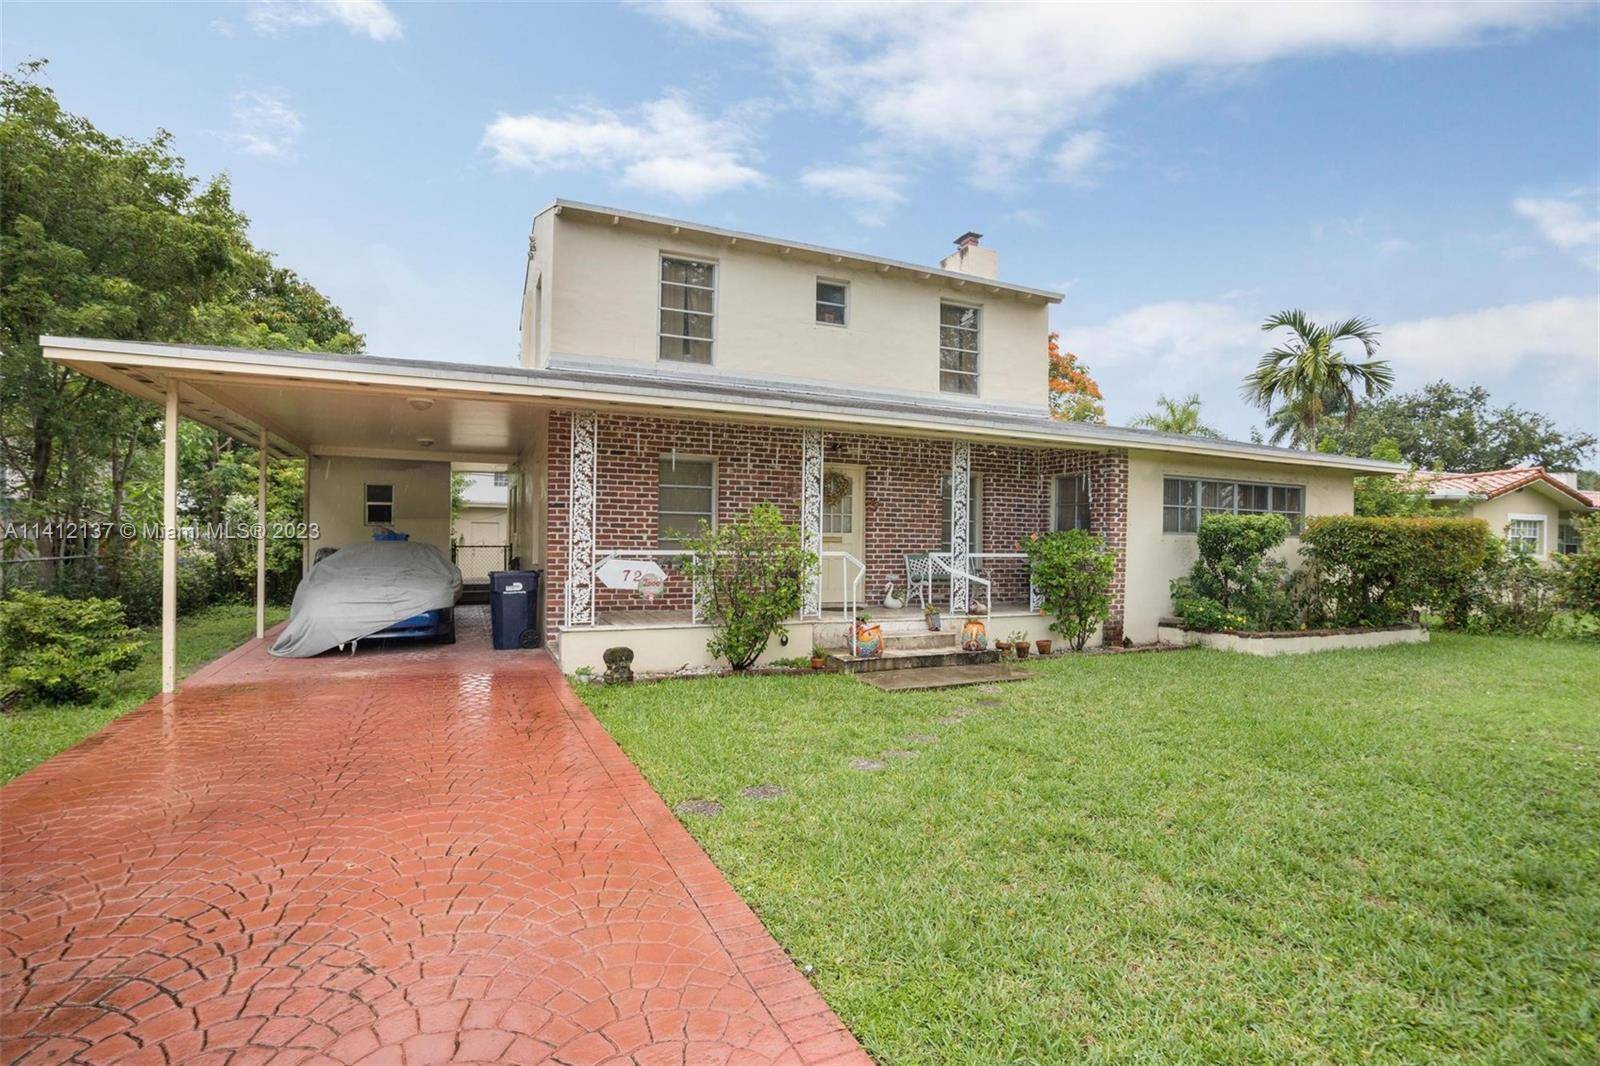 Beautiful Miami Springs. This two story 3 bedroom 2 bath home with detached garage maintains most of its original charm.